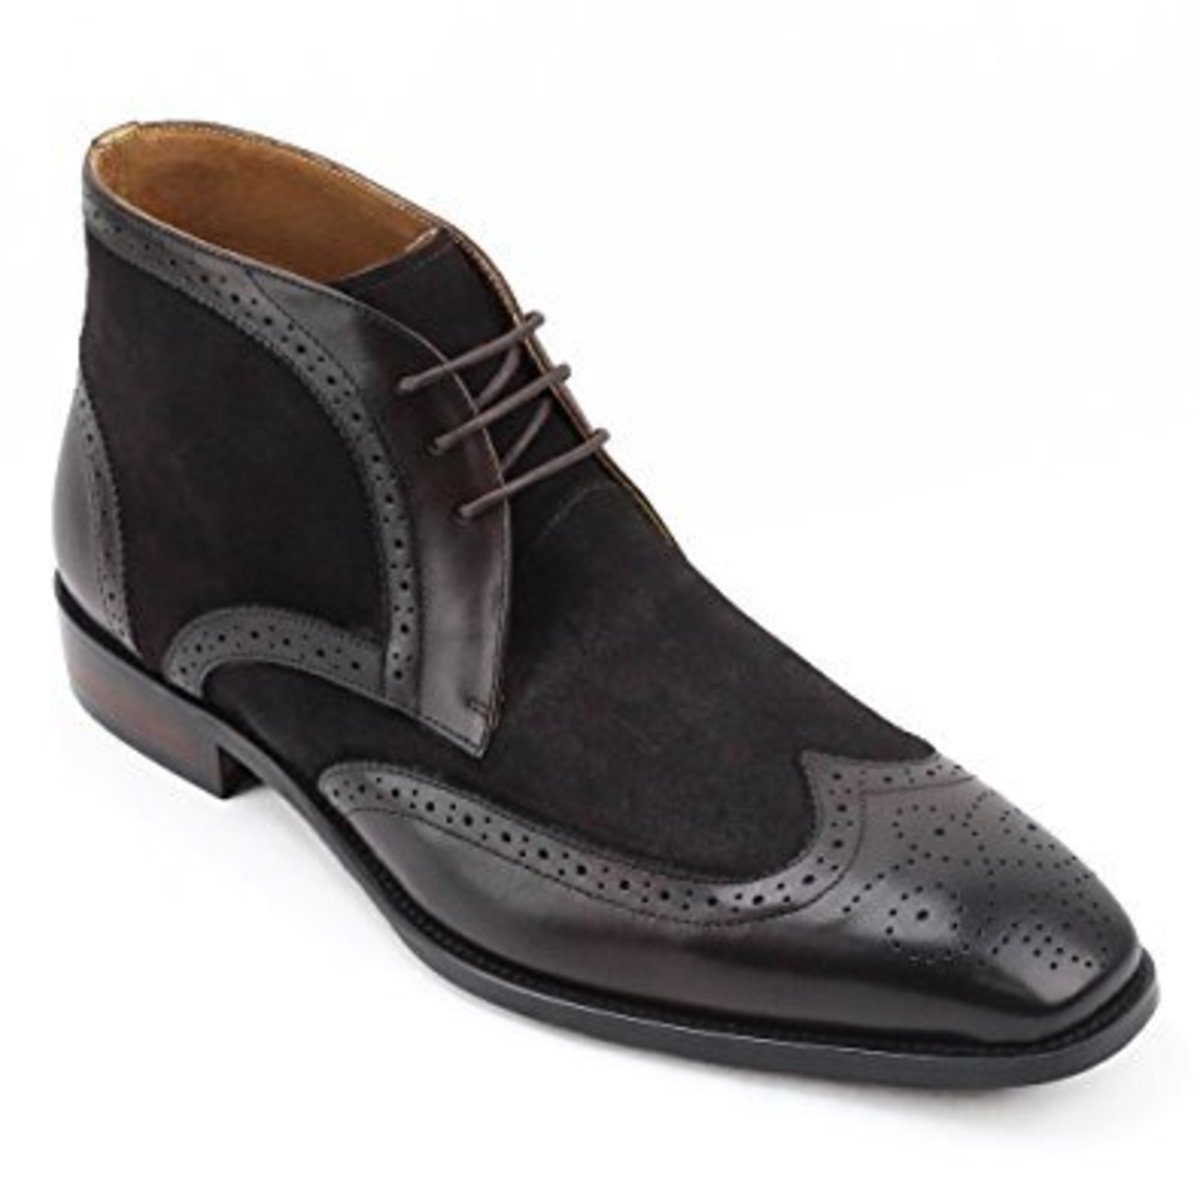 Details about   Handmade Men's Leather Formal Real Wingtip Brown Lace Up Dress Casual Shoes-119